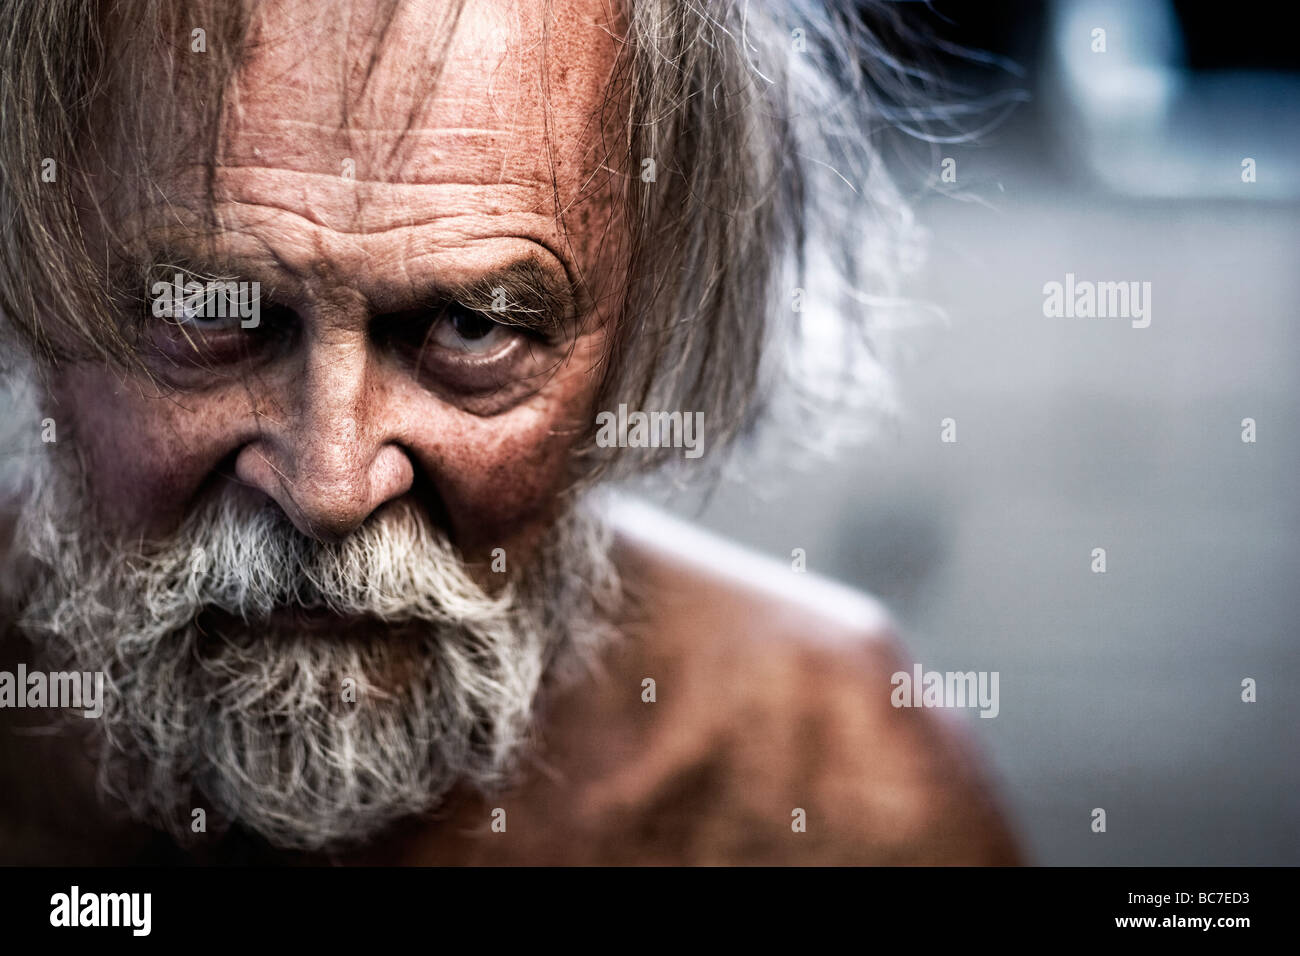 Rugged and crazy looking, wrinkled older man with grey hair and beard. Stock Photo